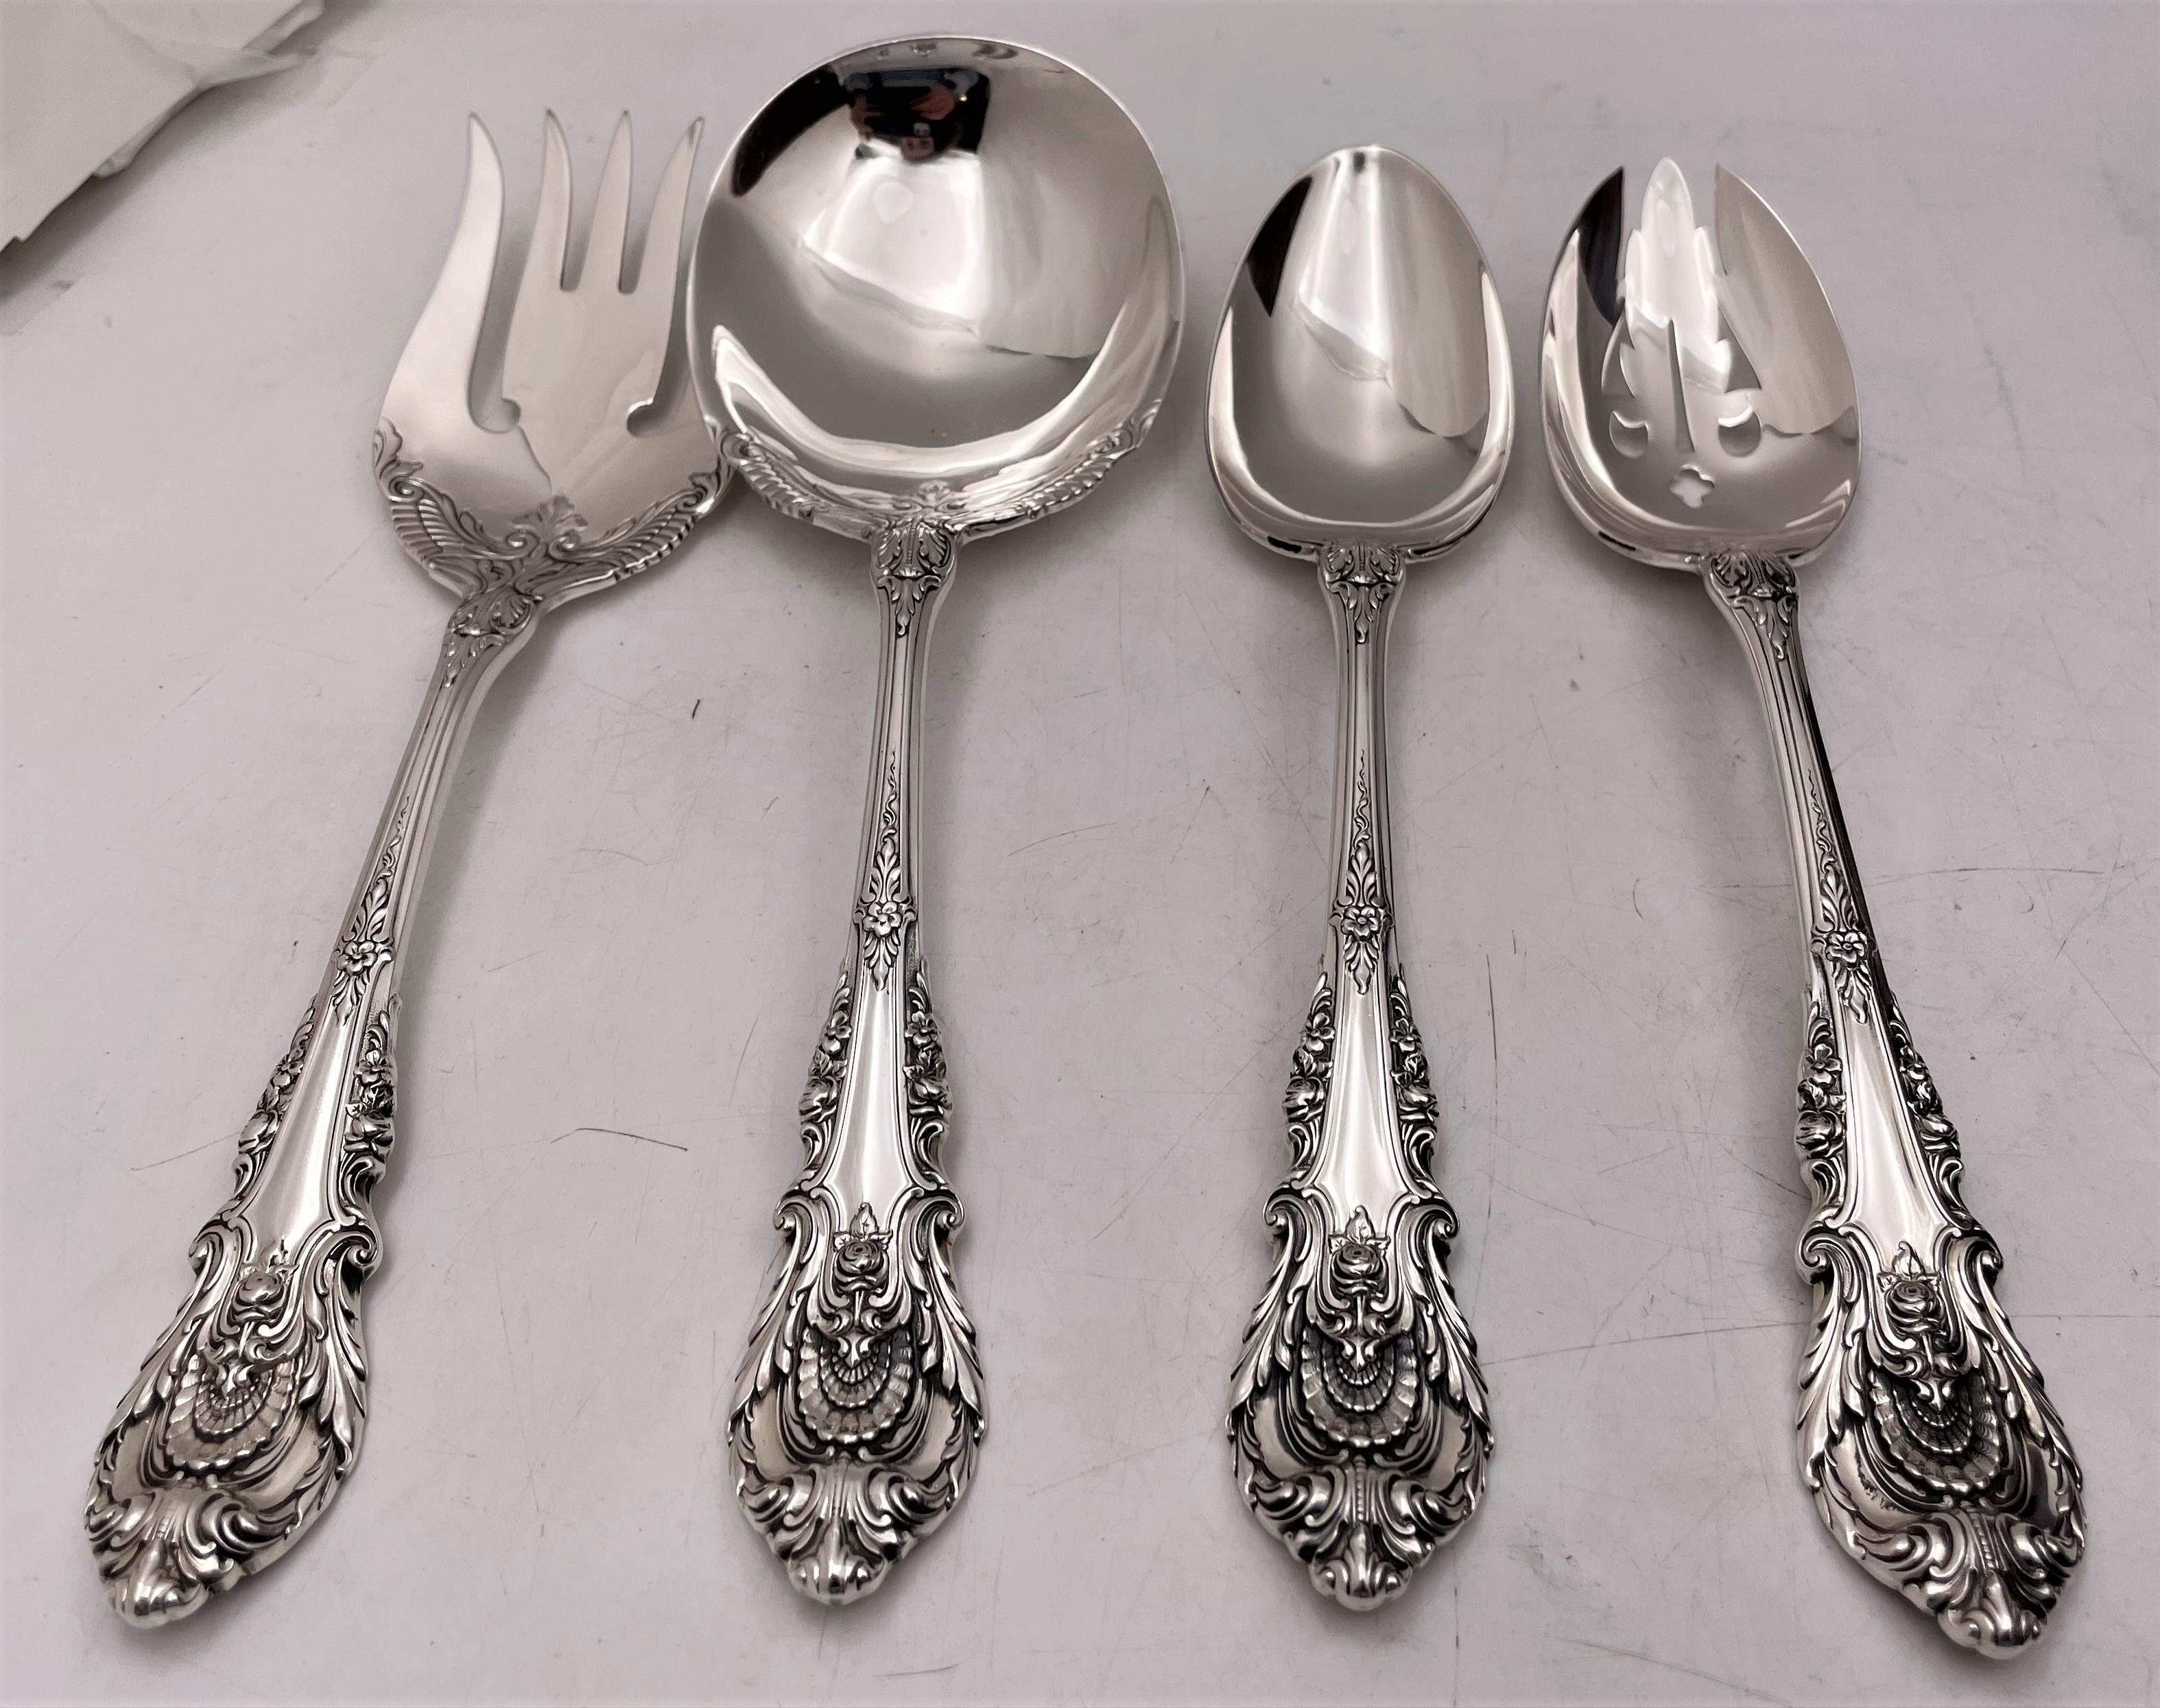 Wallace, sterling silver 88-piece flatware in Sir Christopher pattern, in the English Renaissance style interpreted from the designs of architect Sir Christopher Wren, showing grapes, roses and scroll motifs, consisting of:

- 12 dinner forks